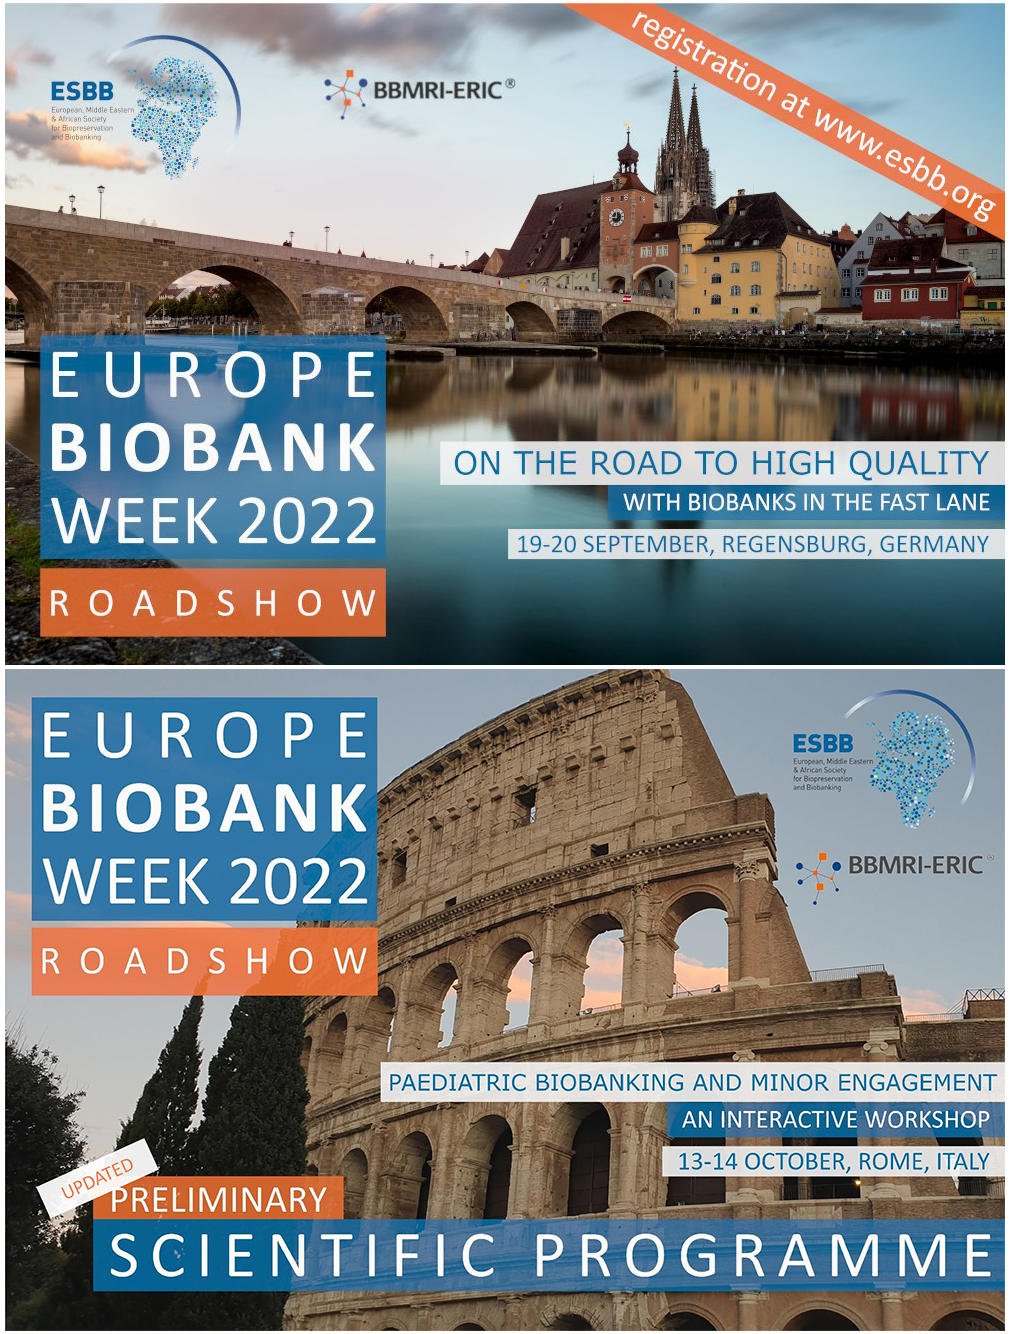 backdrops of Regensburg and Rome are overlaid with Europe Biobank Week Roadshow details